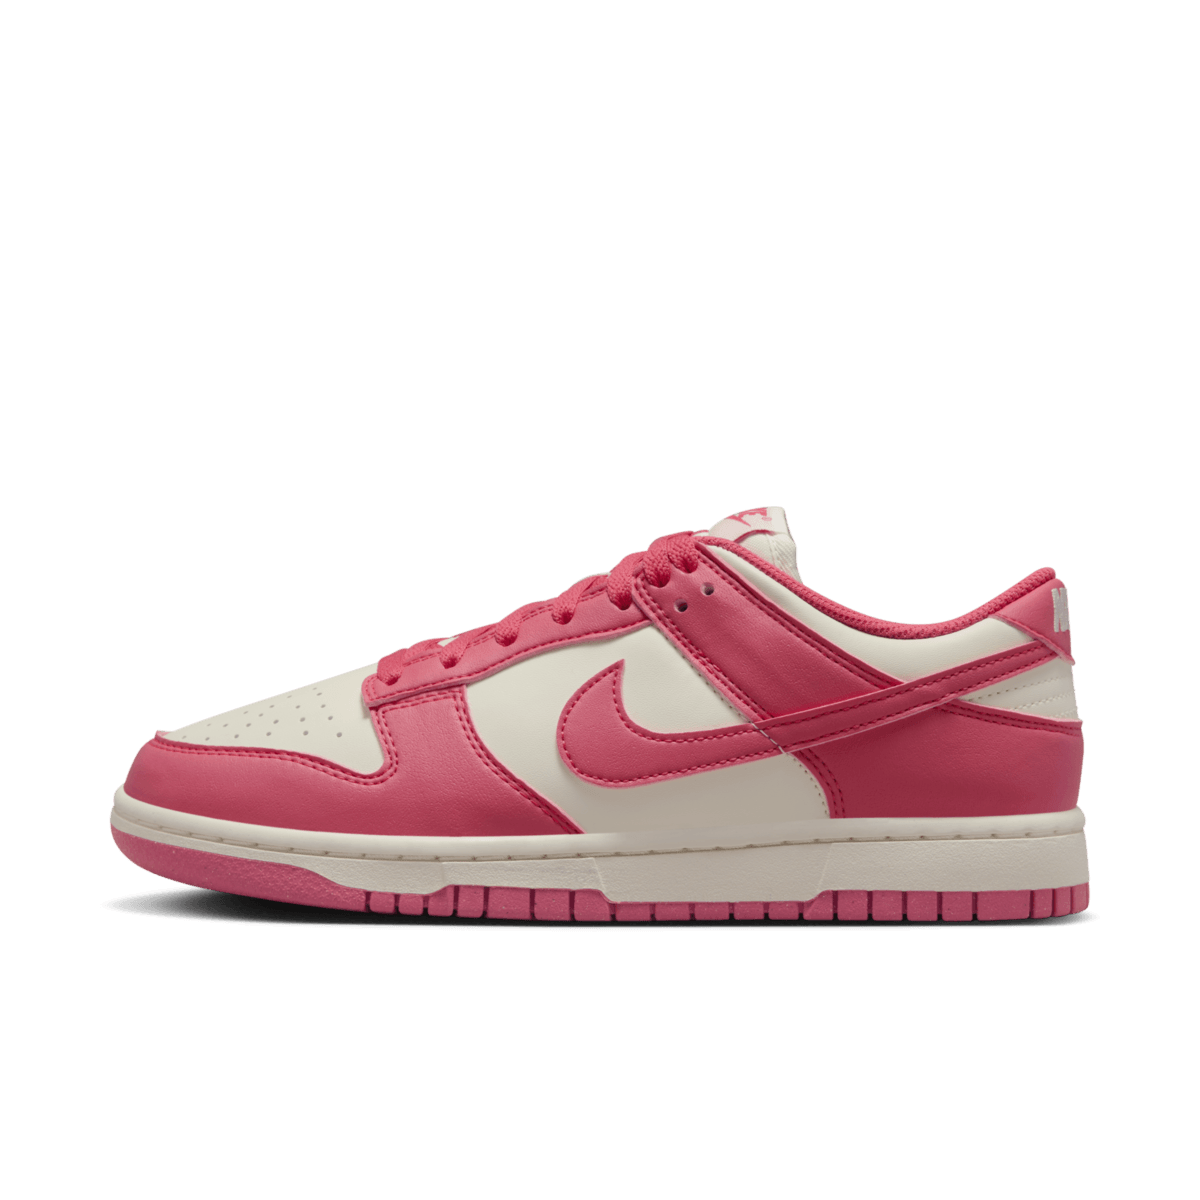 Nike Dunk Low 'Aster Pink' DD1873-600